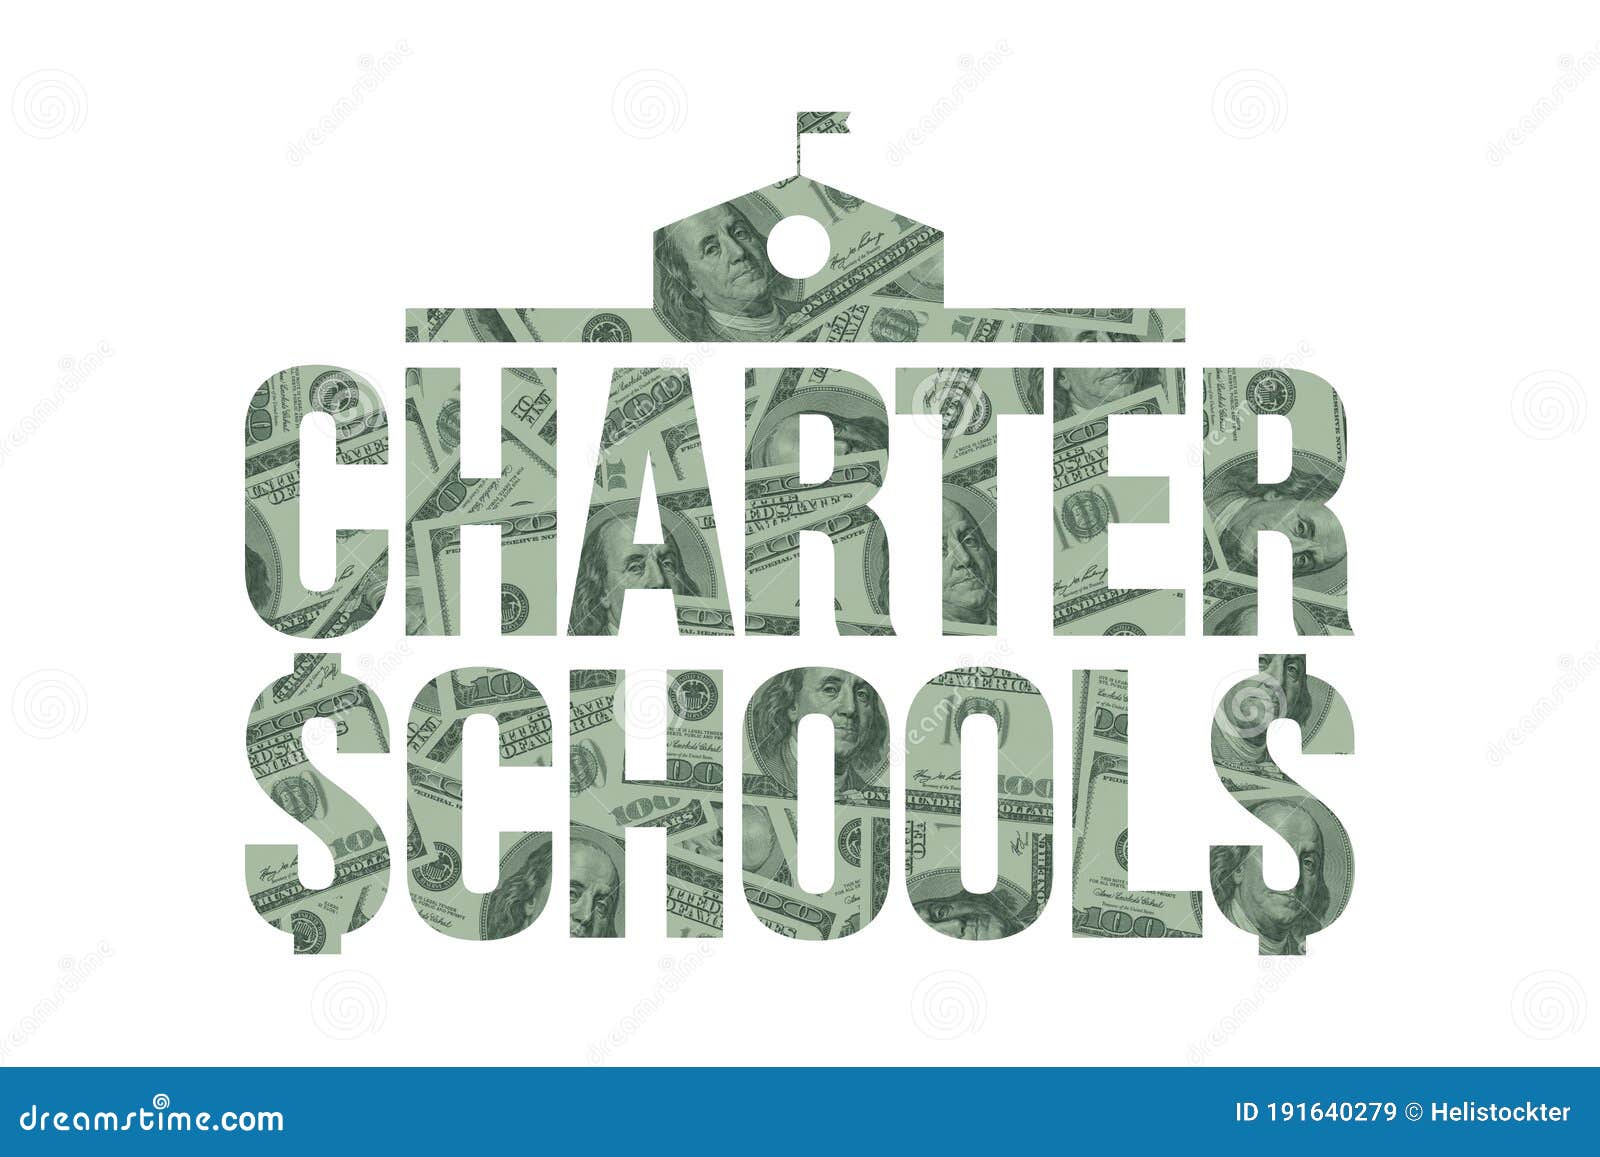 charter school and money, one hundred dollar bills and schoolhouse